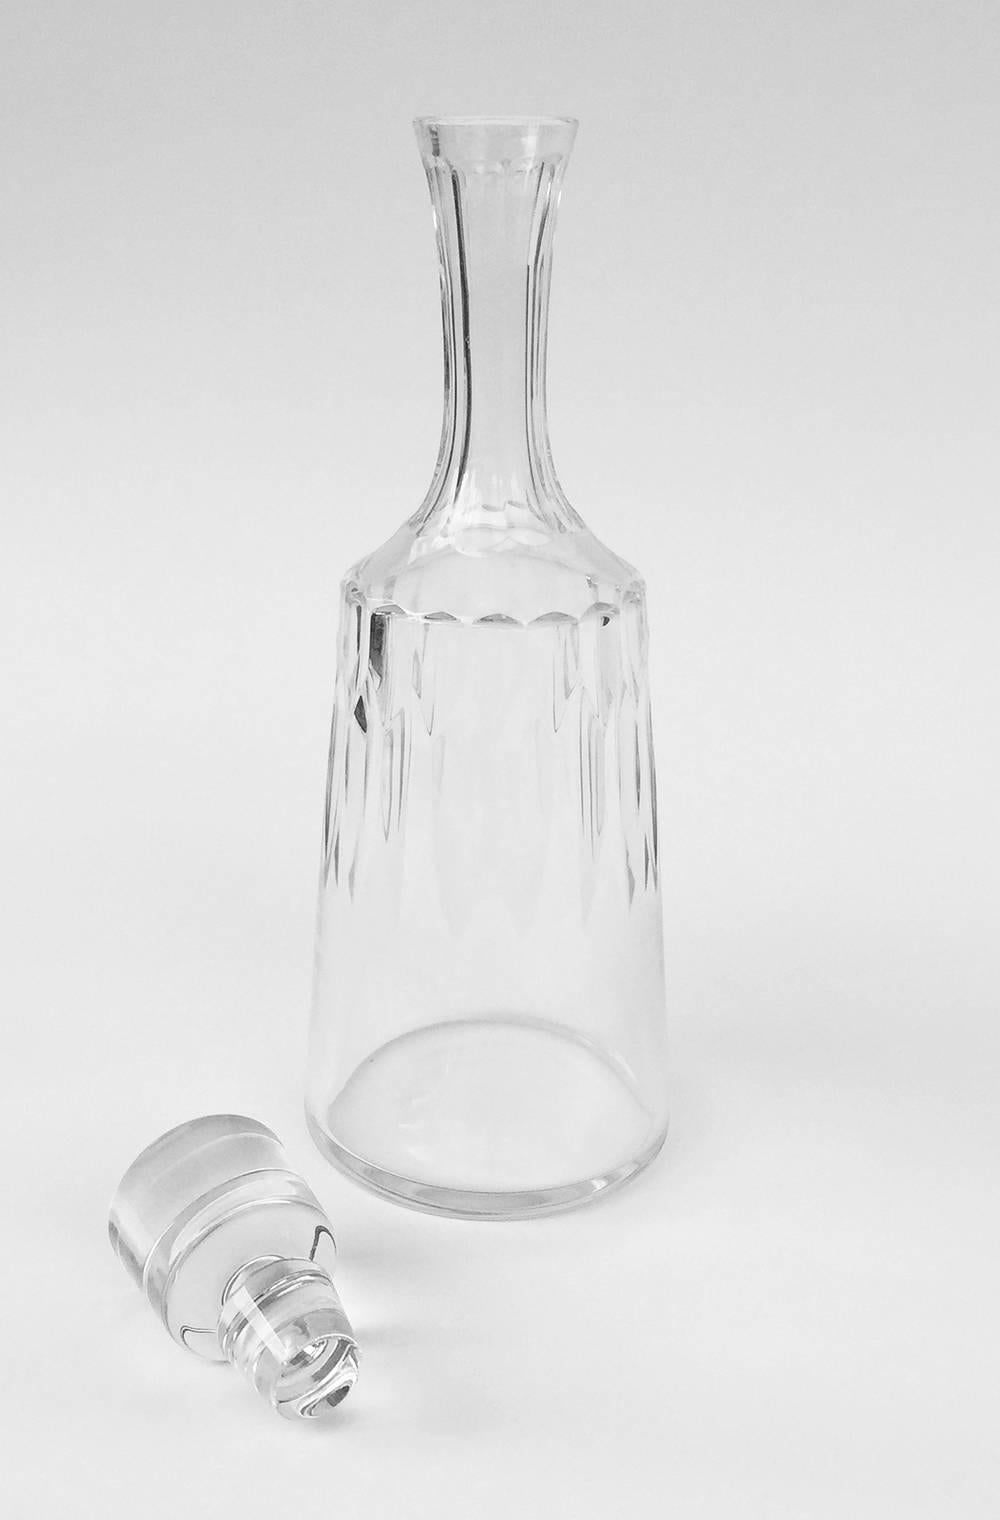 French Baccarat D'Assas pattern cut crystal decanter and stopper, the flaring-cylindrical body of the decanter with panel-cut neck and vertical cuts on the upper portion of the bottle, the base also cut. Etched to the underside with Baccarat France,